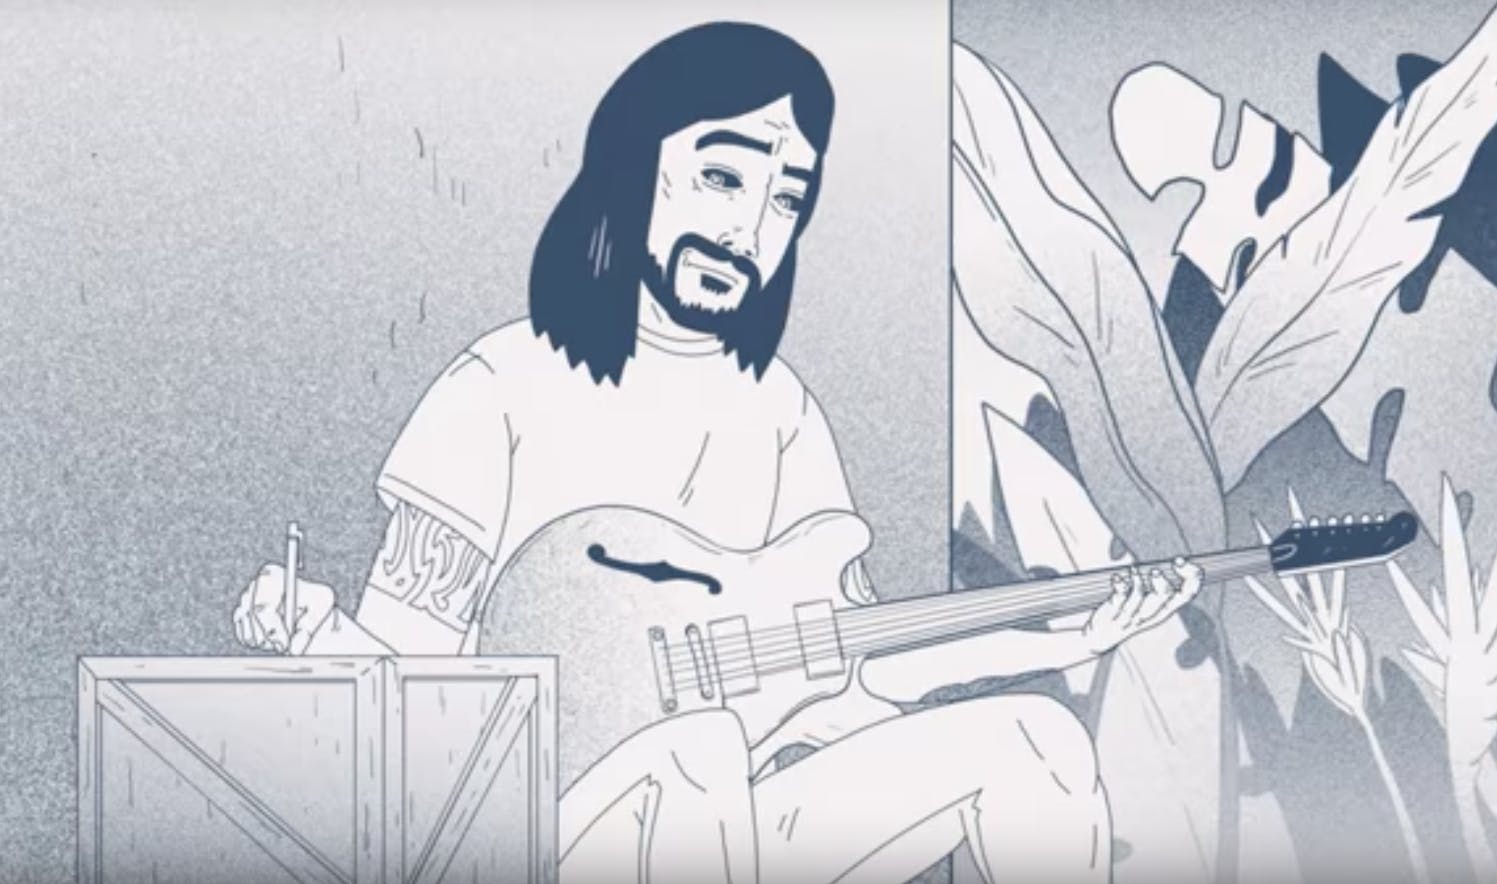 Foo Fighters Release Hilarious Animated Video About The Making Of Their New Album